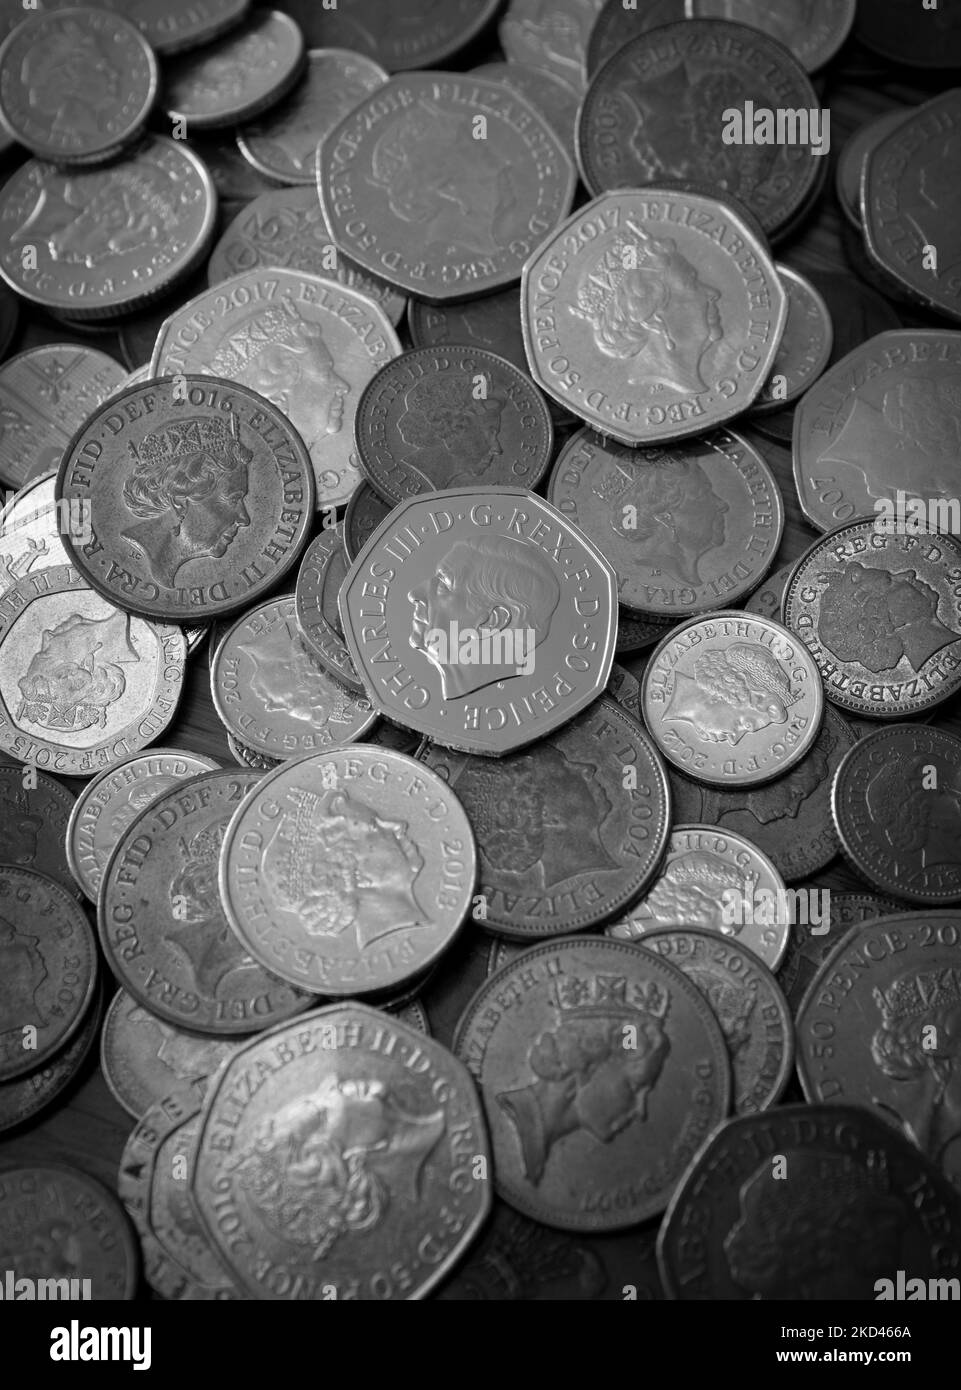 Loose change including the new Fifty pence piece featuring King Charles III portrait Stock Photo